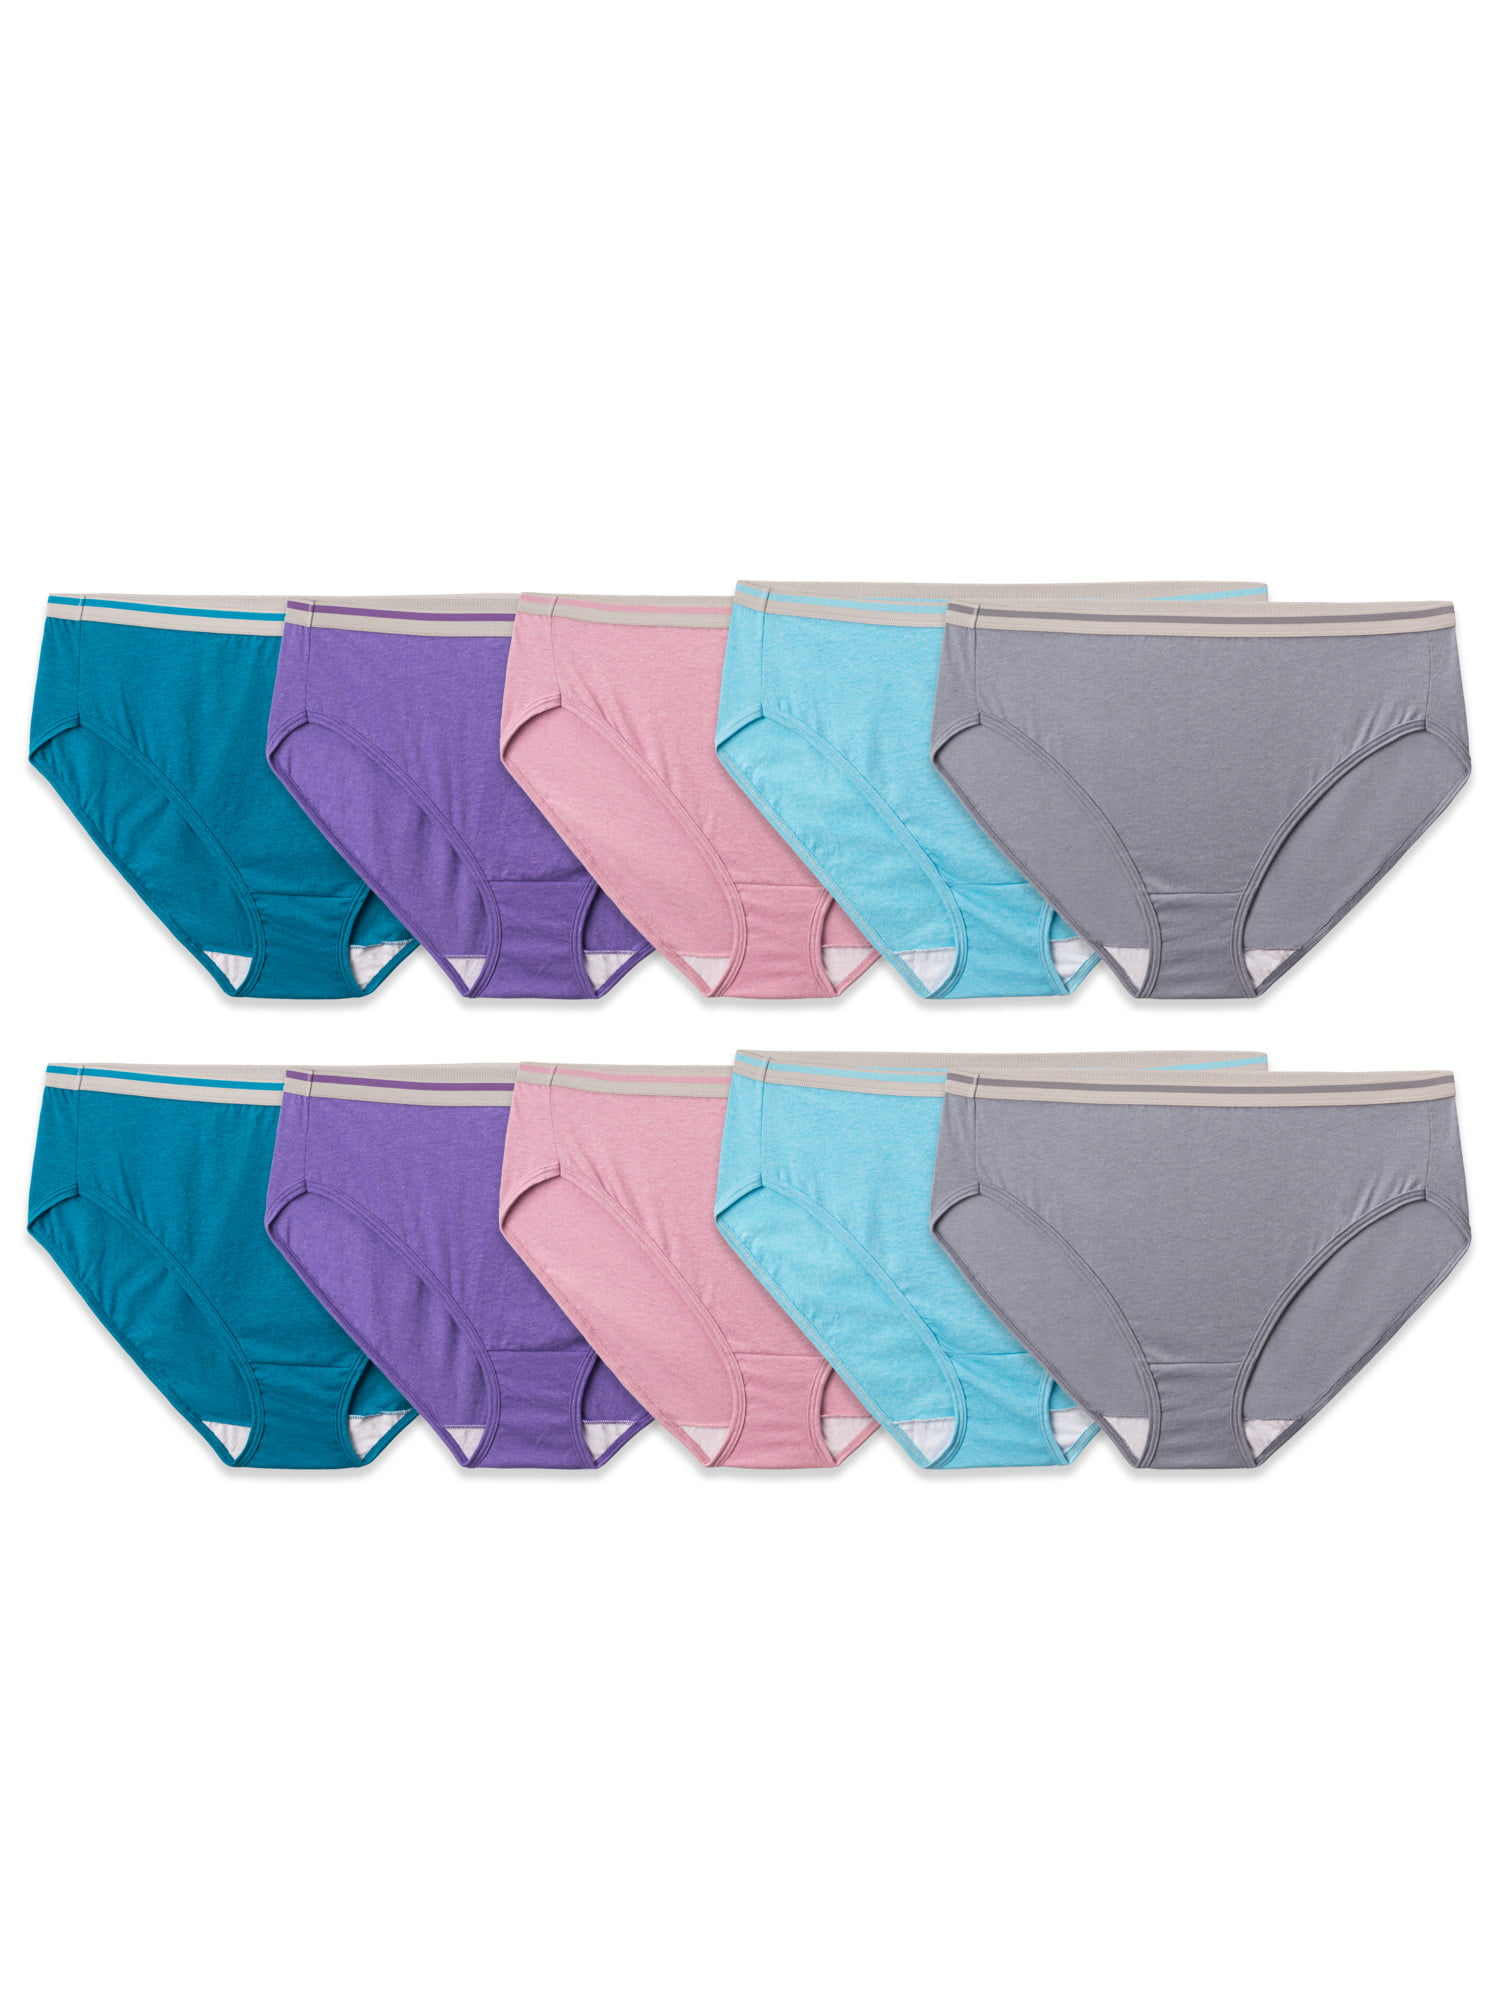 Fruit of the Loom Womens 5 Pack Fit for Me Cotton Hi Cut Brief 